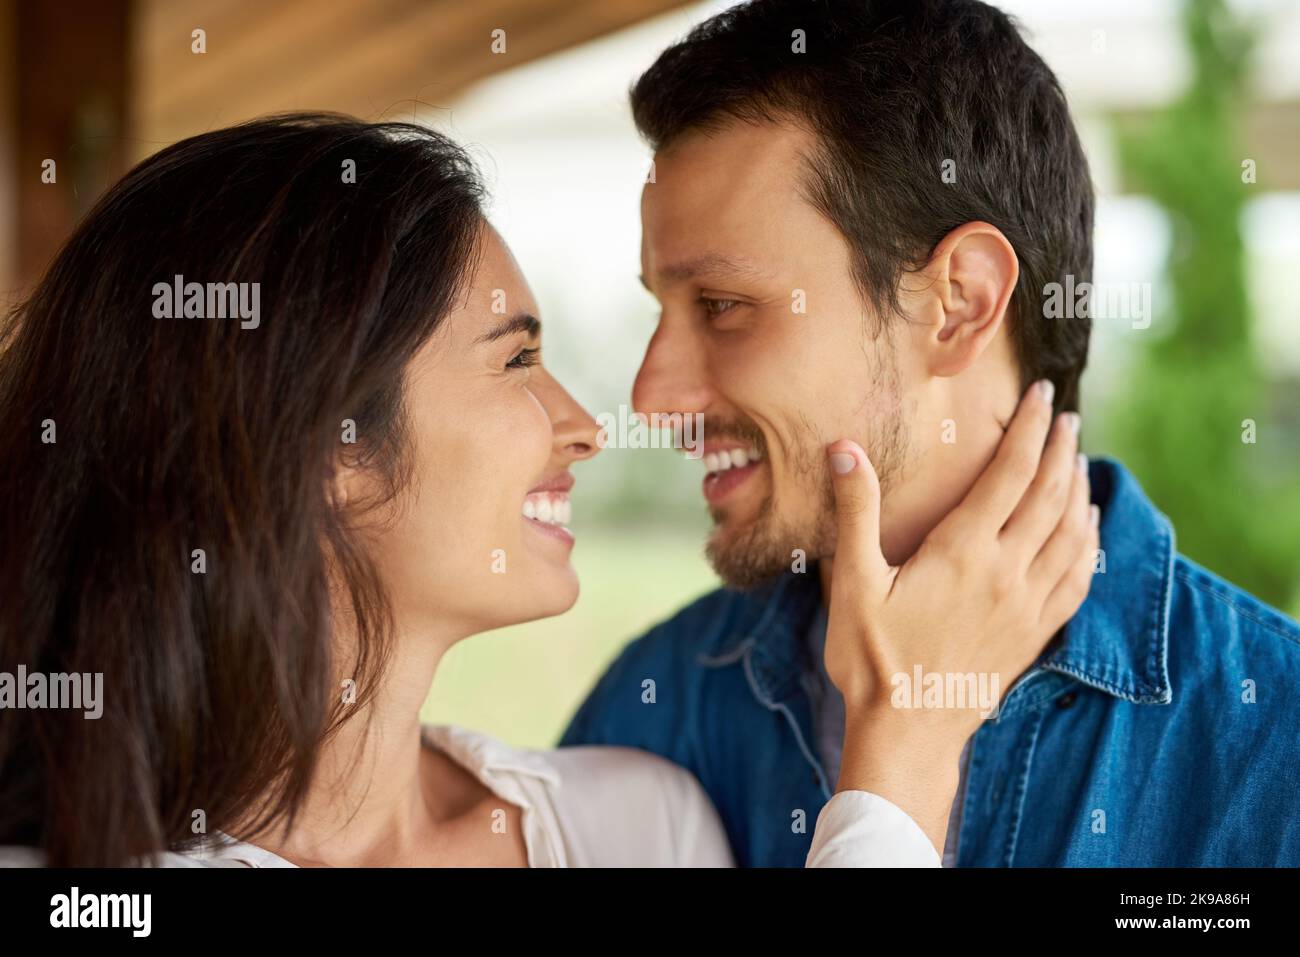 We always find love in each others eyes. an affectionate young couple spending some time together at home. Stock Photo